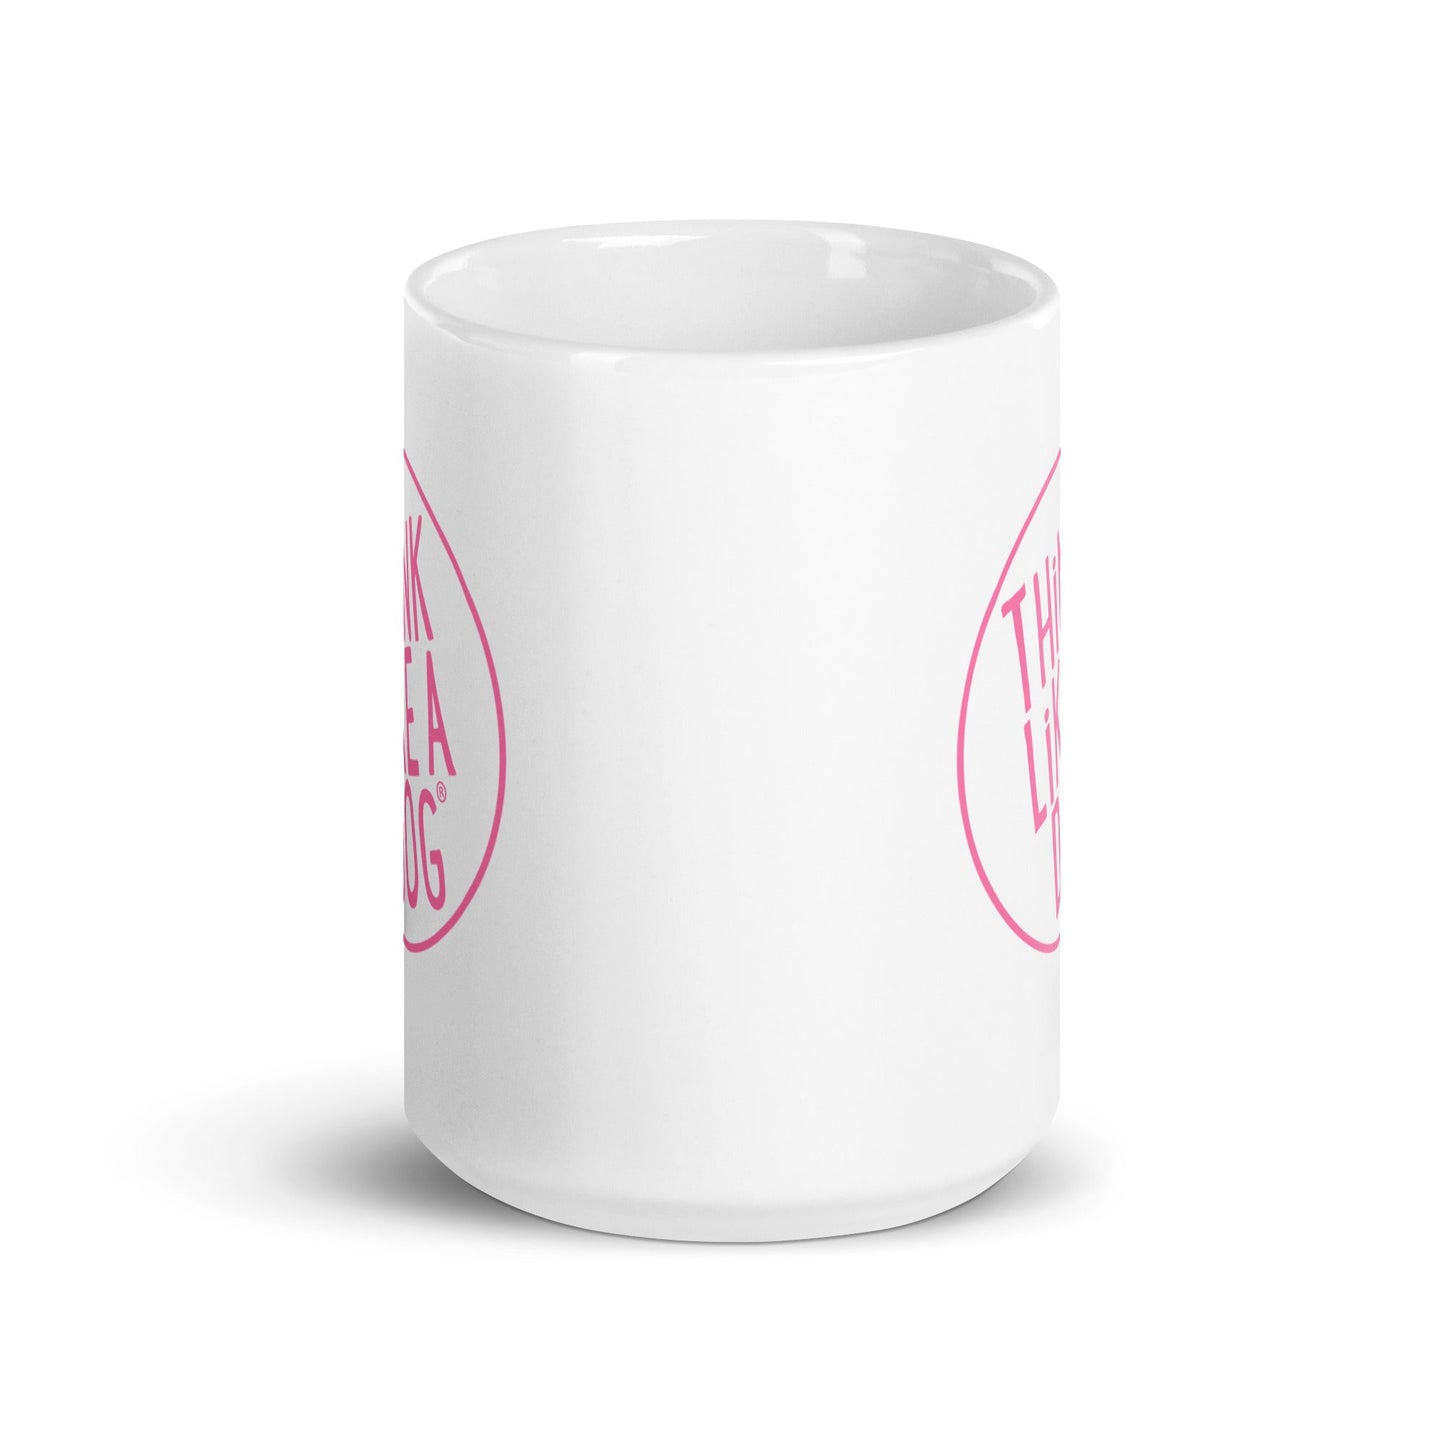 A THiNK LiKE A DOG® Pink Logo on White Glossy Mug, perfect for dog lovers.